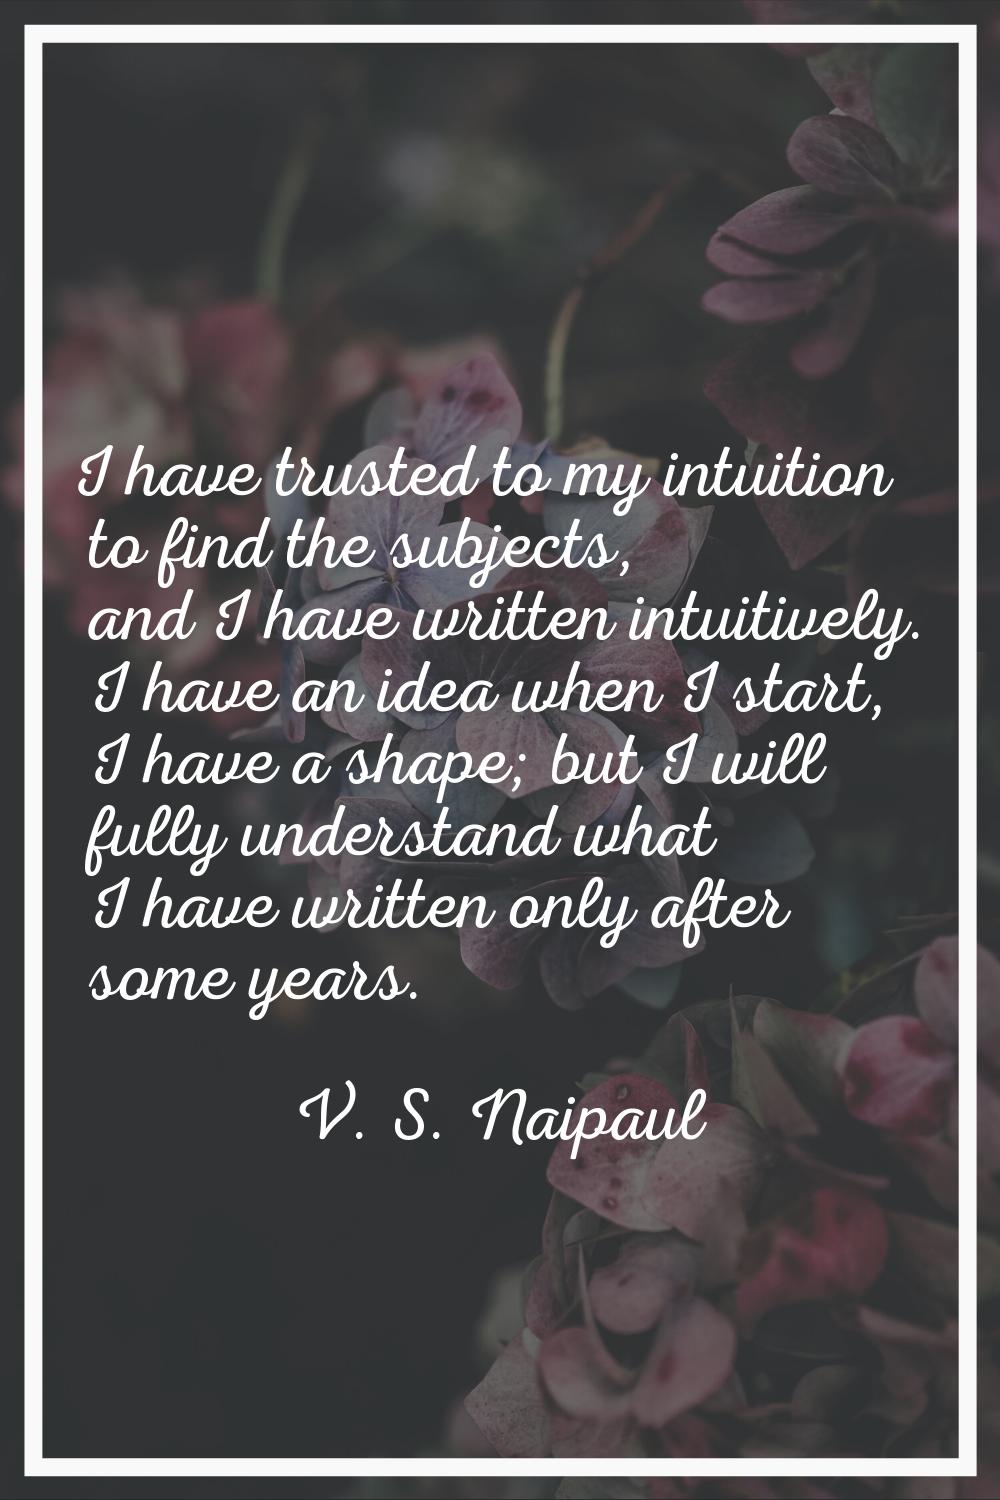 I have trusted to my intuition to find the subjects, and I have written intuitively. I have an idea